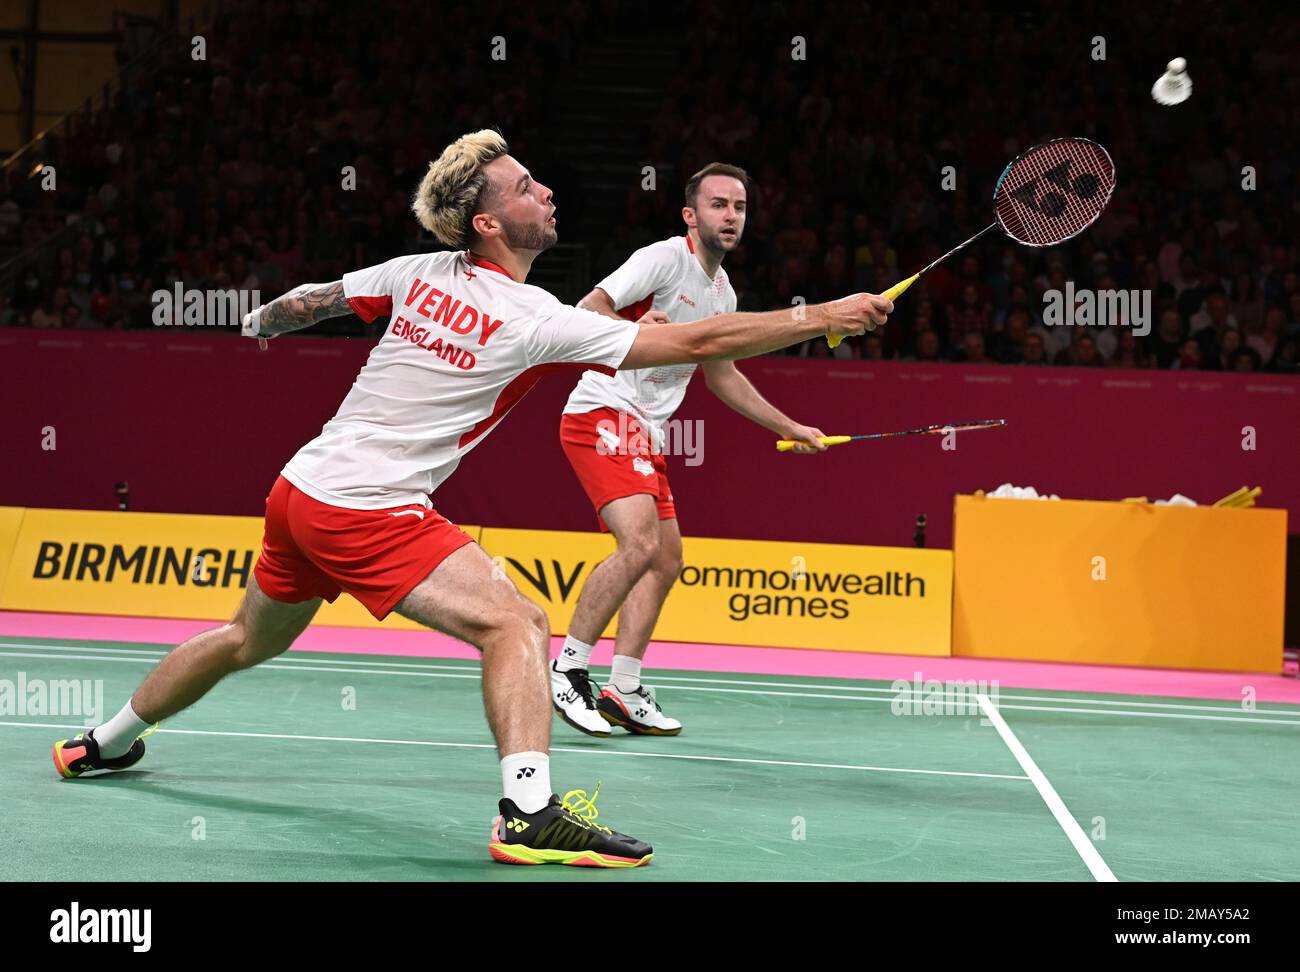 Englands Sean Vendy and Ben Lane, right, compete during the Badminton Mens Doubles Round game against Canadas Adam Dong and Nyl Kiyoshi Yakura at the Commonwealth Games in Birmingham, England, Friday, Aug.